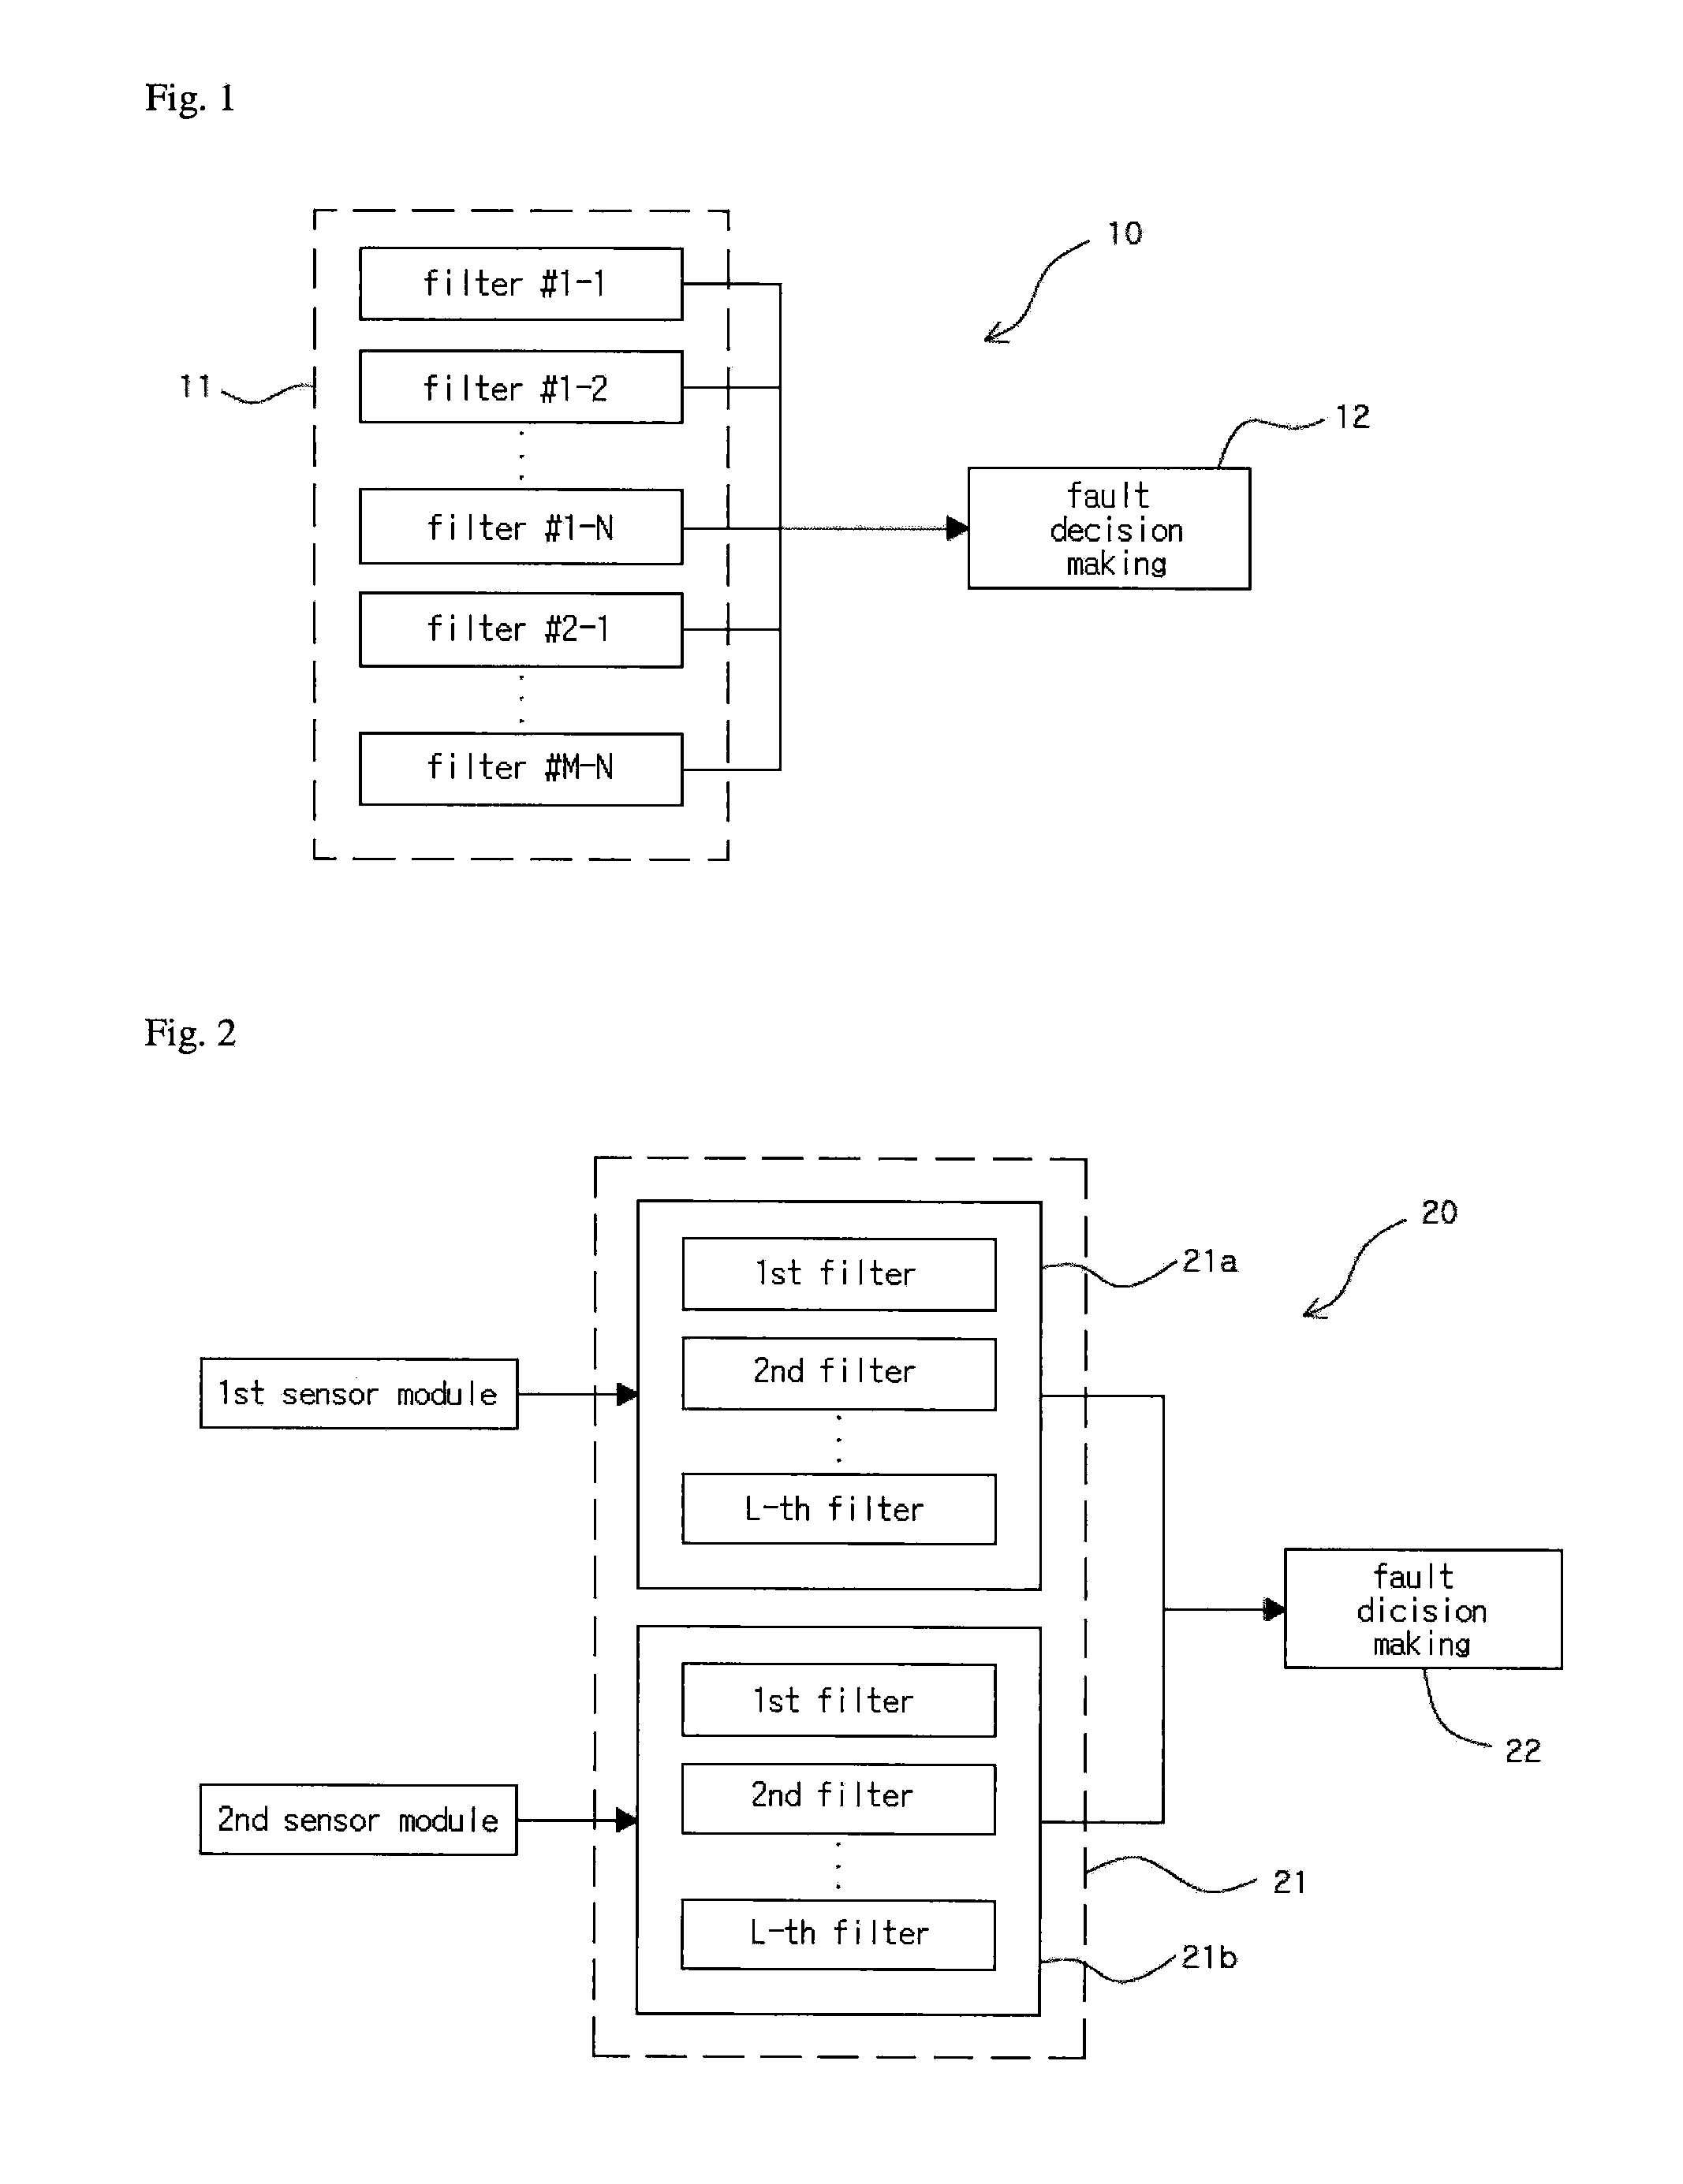 Fault Detector and Fault Detection Method for Attitude Control System of Spacecraft